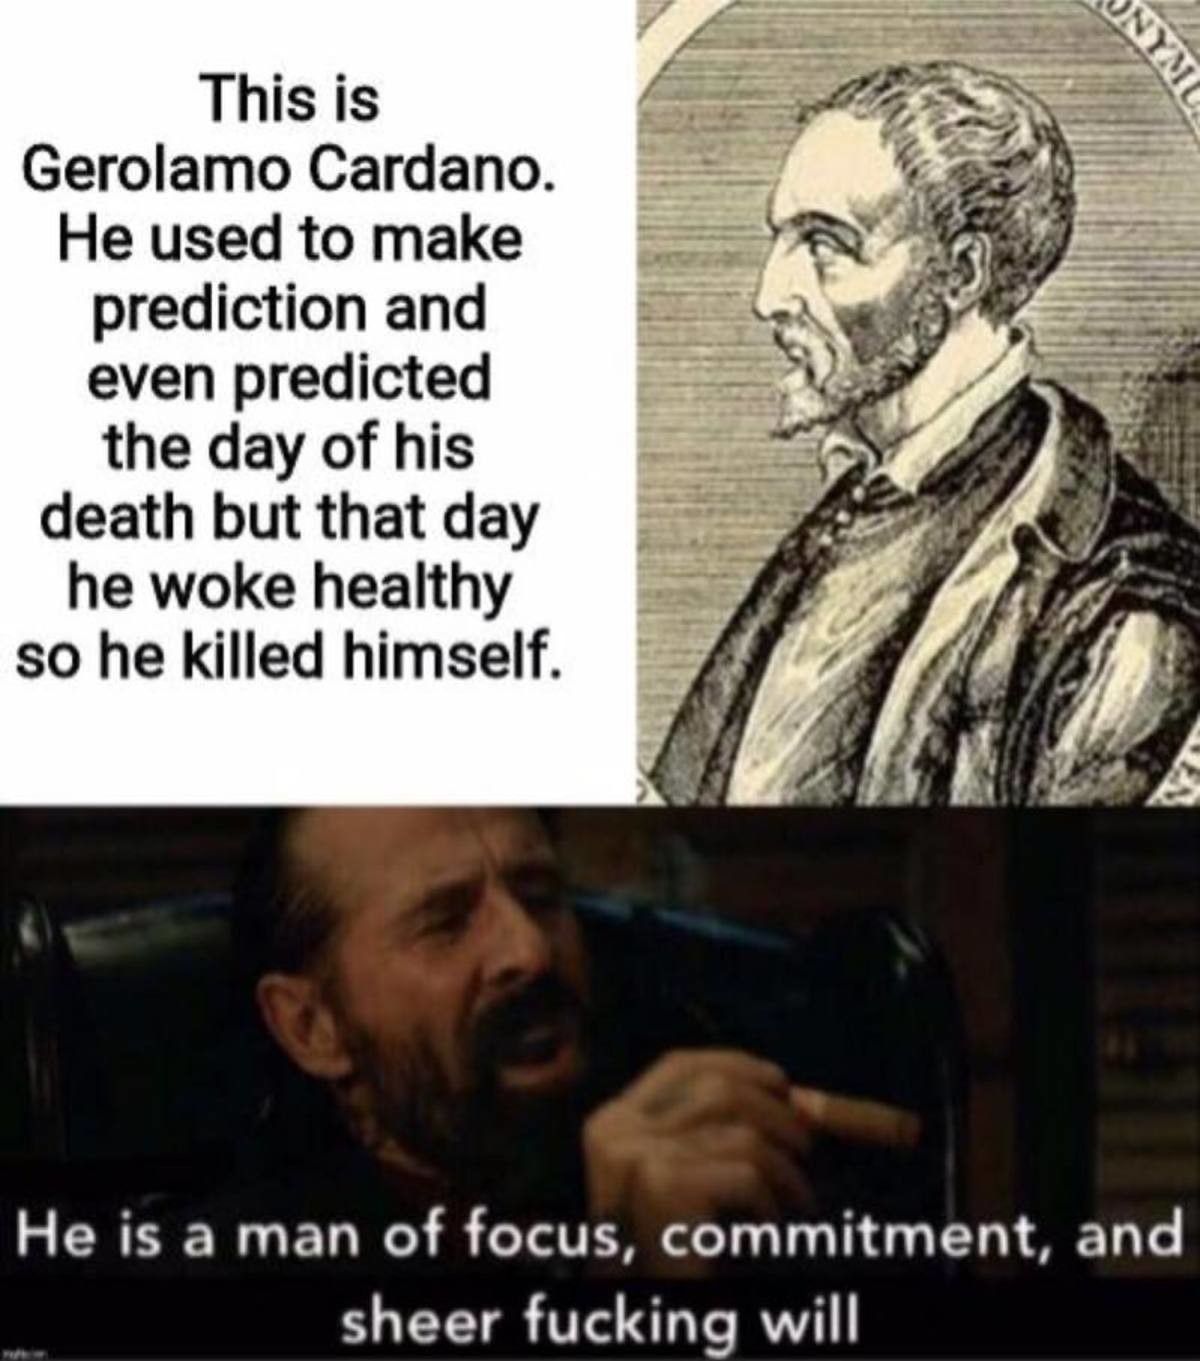 Onym This is Gerolamo Cardano. He used to make prediction and even predicted the day of his death but that day he woke healthy so he killed himself. He is a man of focus, commitment, and sheer fucking will